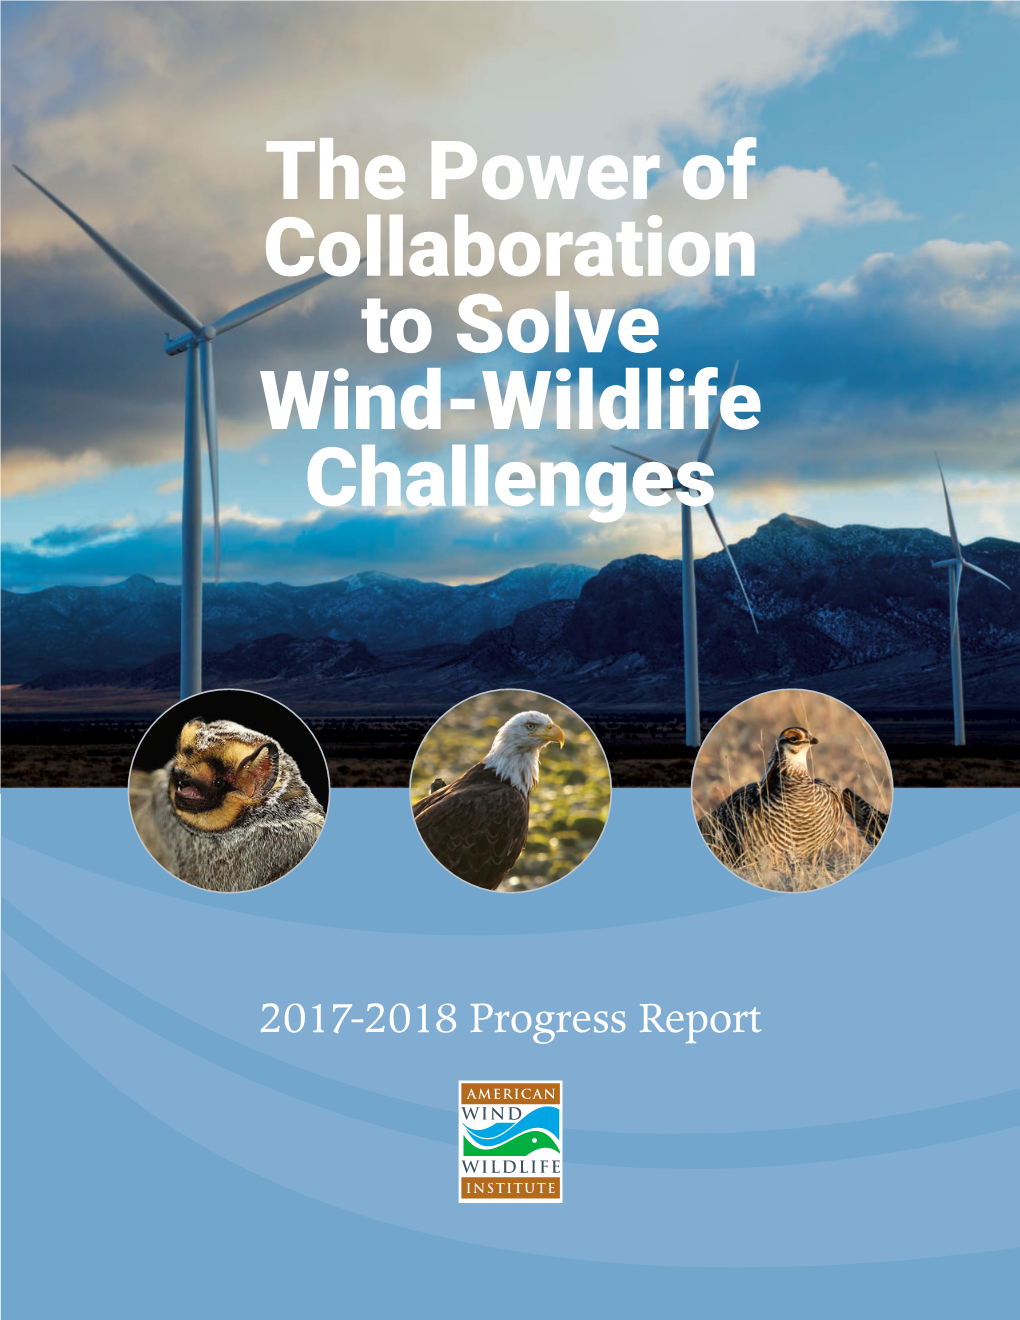 The Power of Collaboration to Solve Wind-Wildlife Challenges